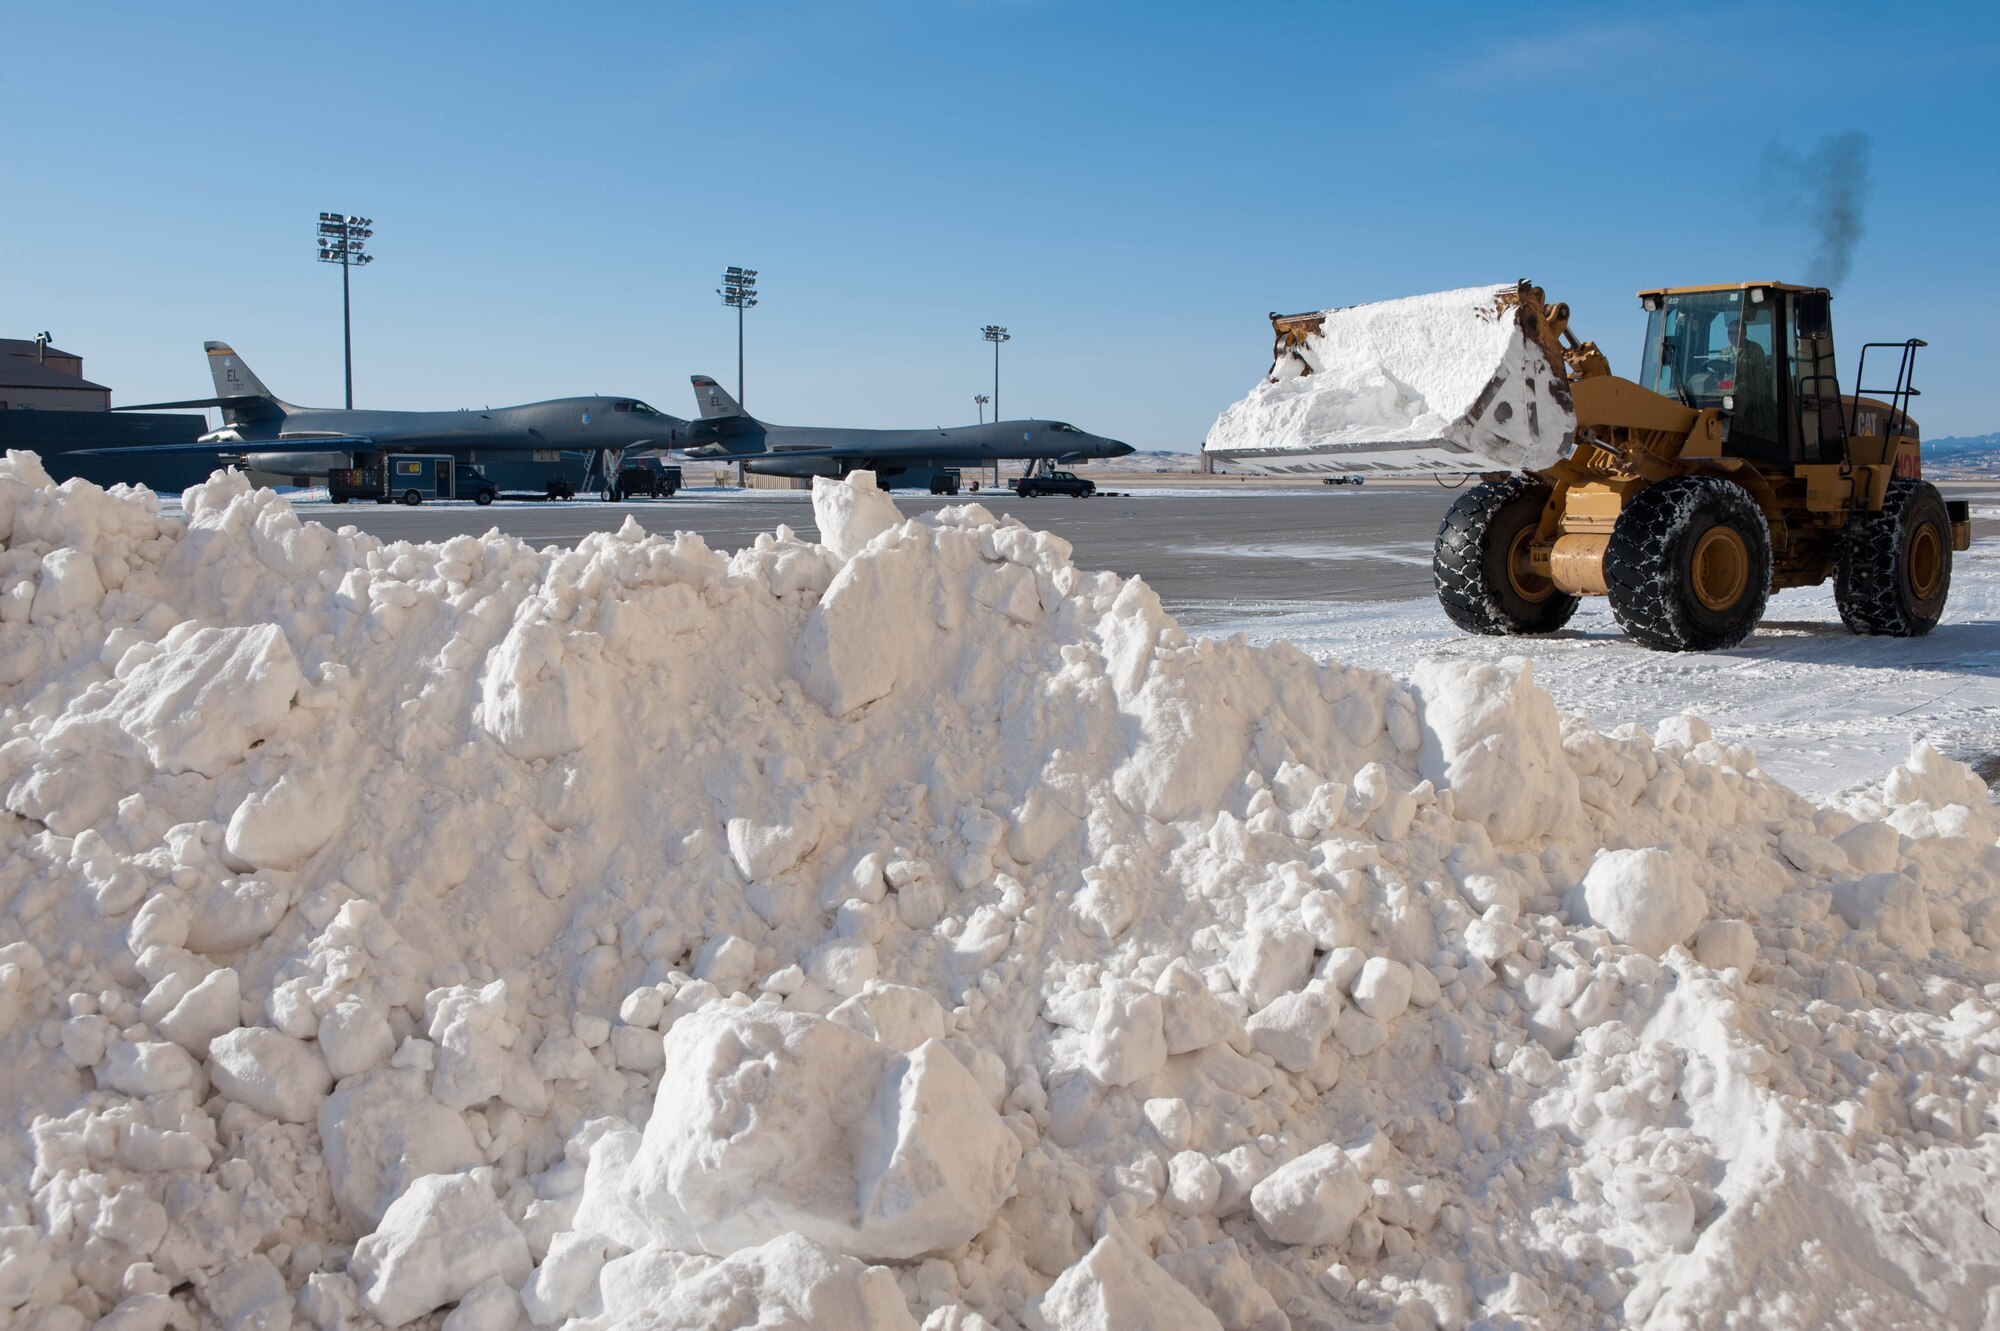 Airman 1st Class Nick Eslick, 28th Civil Engineer Squadron pavement and construction equipment operator, uses a front-end loader to remove snow from the flightline at Ellsworth Air Force Base, S.D., Feb. 29, 2012. Pavement and construction equipment specialists operate and maintain heavy construction equipment such as front-end loaders, bulldozers, dump trucks, skid steer loaders and road graders to keep operations at Ellsworth running seamlessly. (U.S. Air Force photo by Airman 1st Class Zachary Hada/Released)